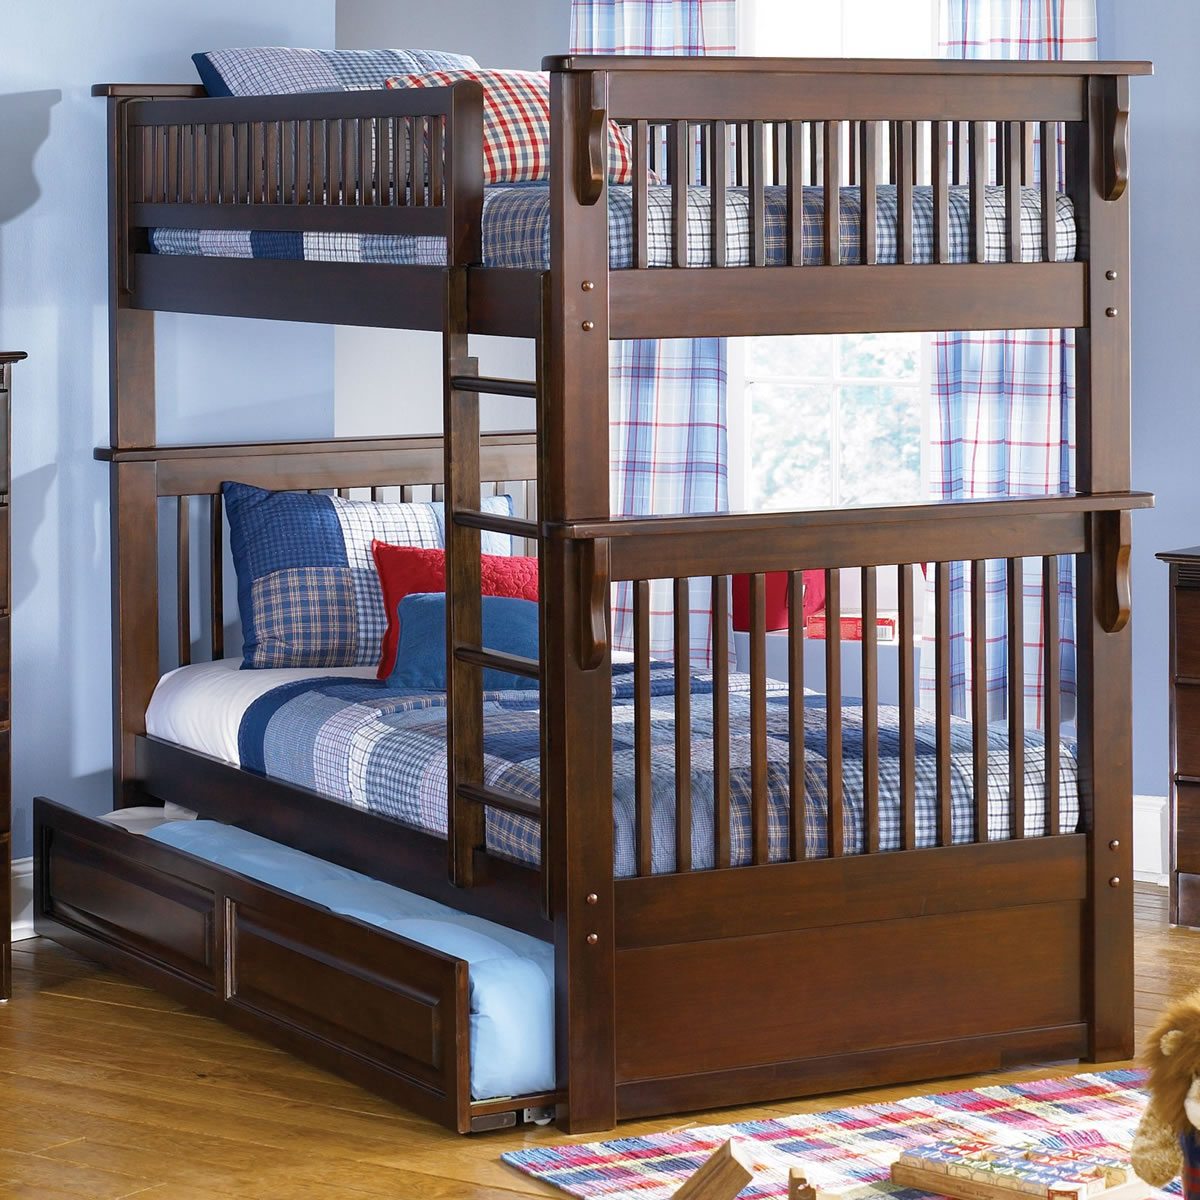 best twin over twin bunk beds